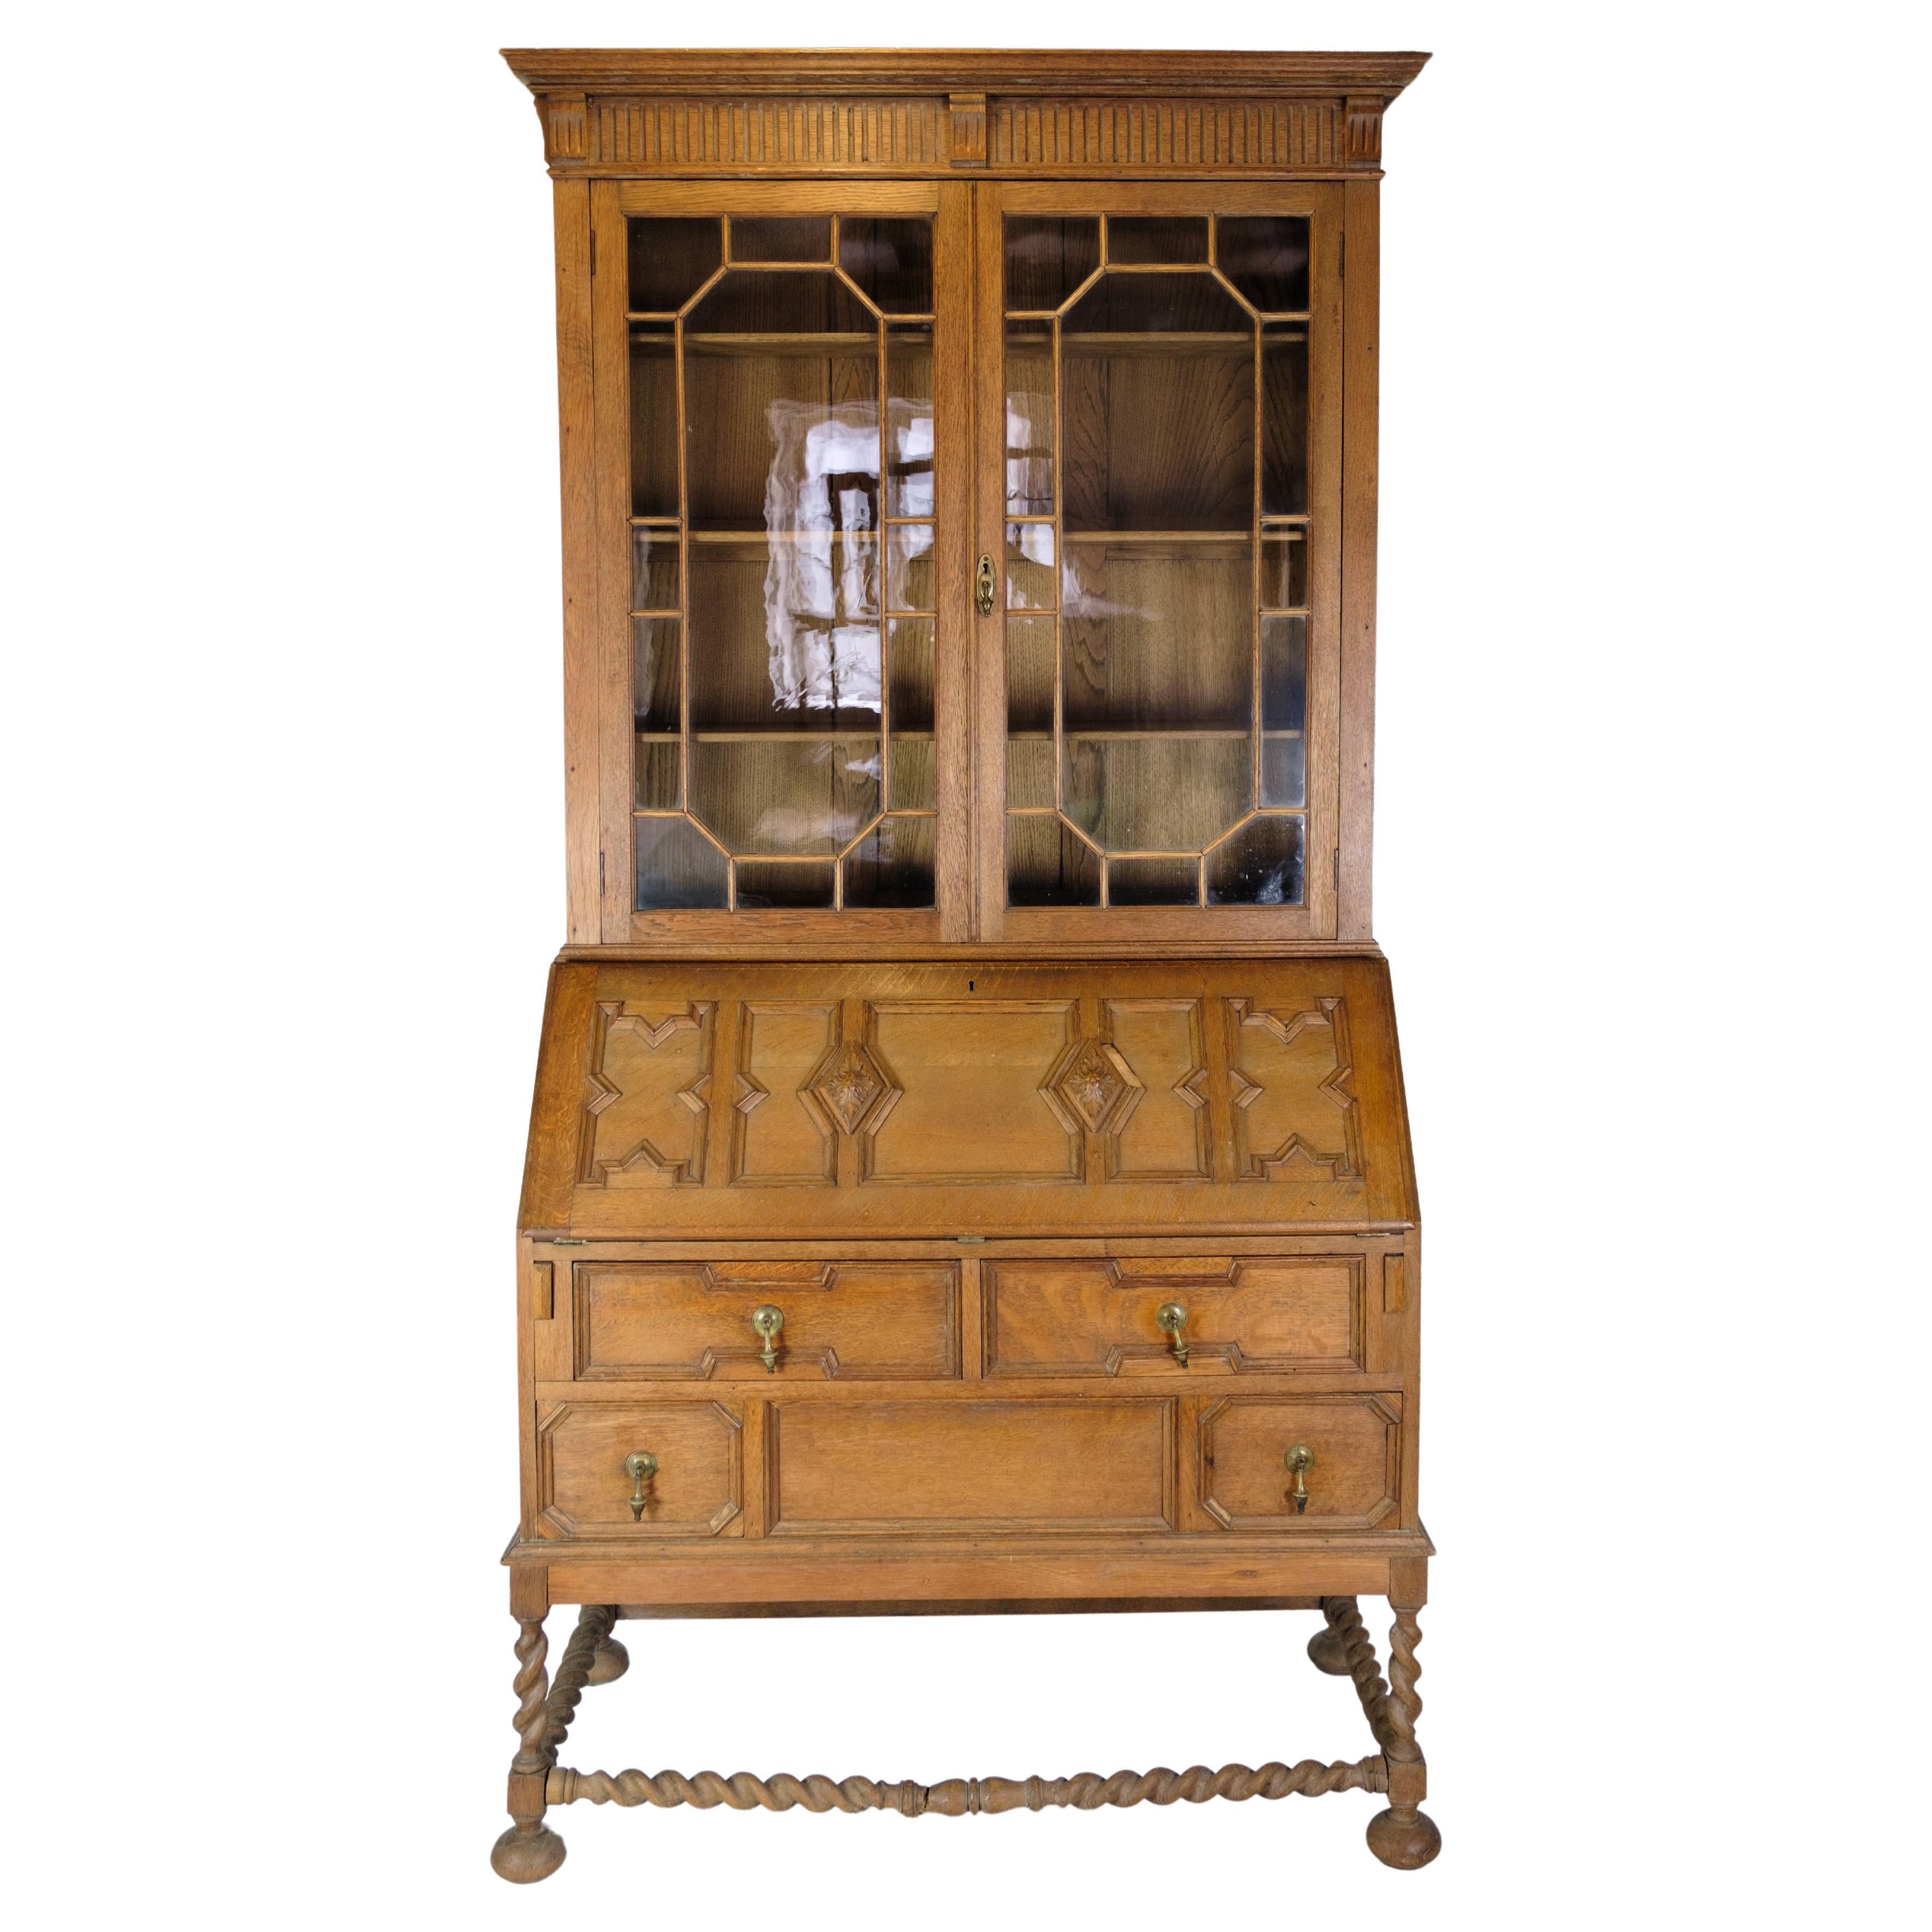 Chatol with Upper cabinet in Oak with Wood Carvings from England, 1890 For Sale